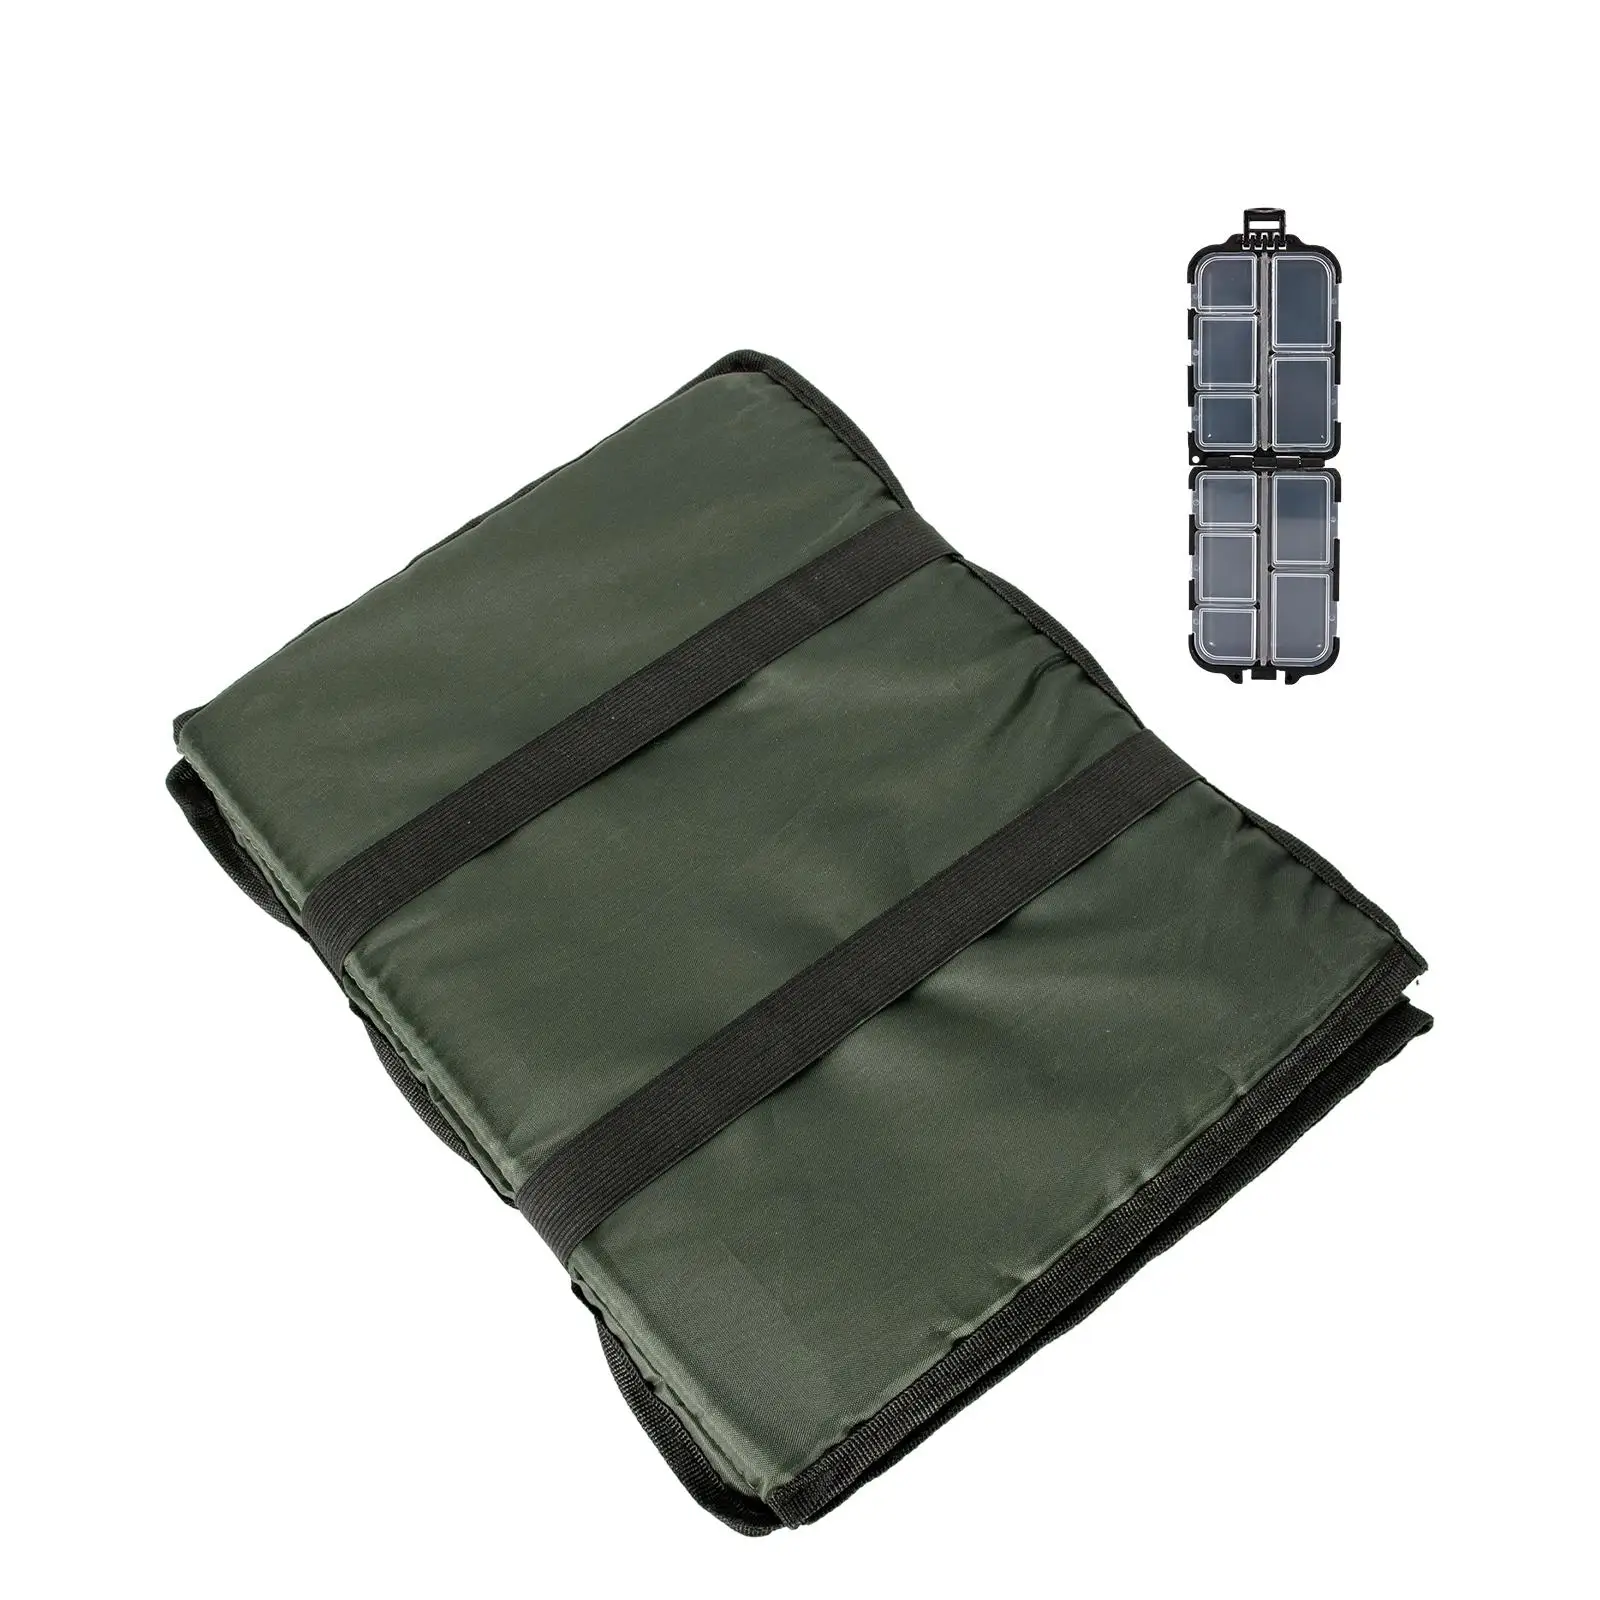 Portable Foldable Carp Fishing Release Mat with Small Lure Box Size 30x38x7cm with Elasticated Transport Straps Accessory